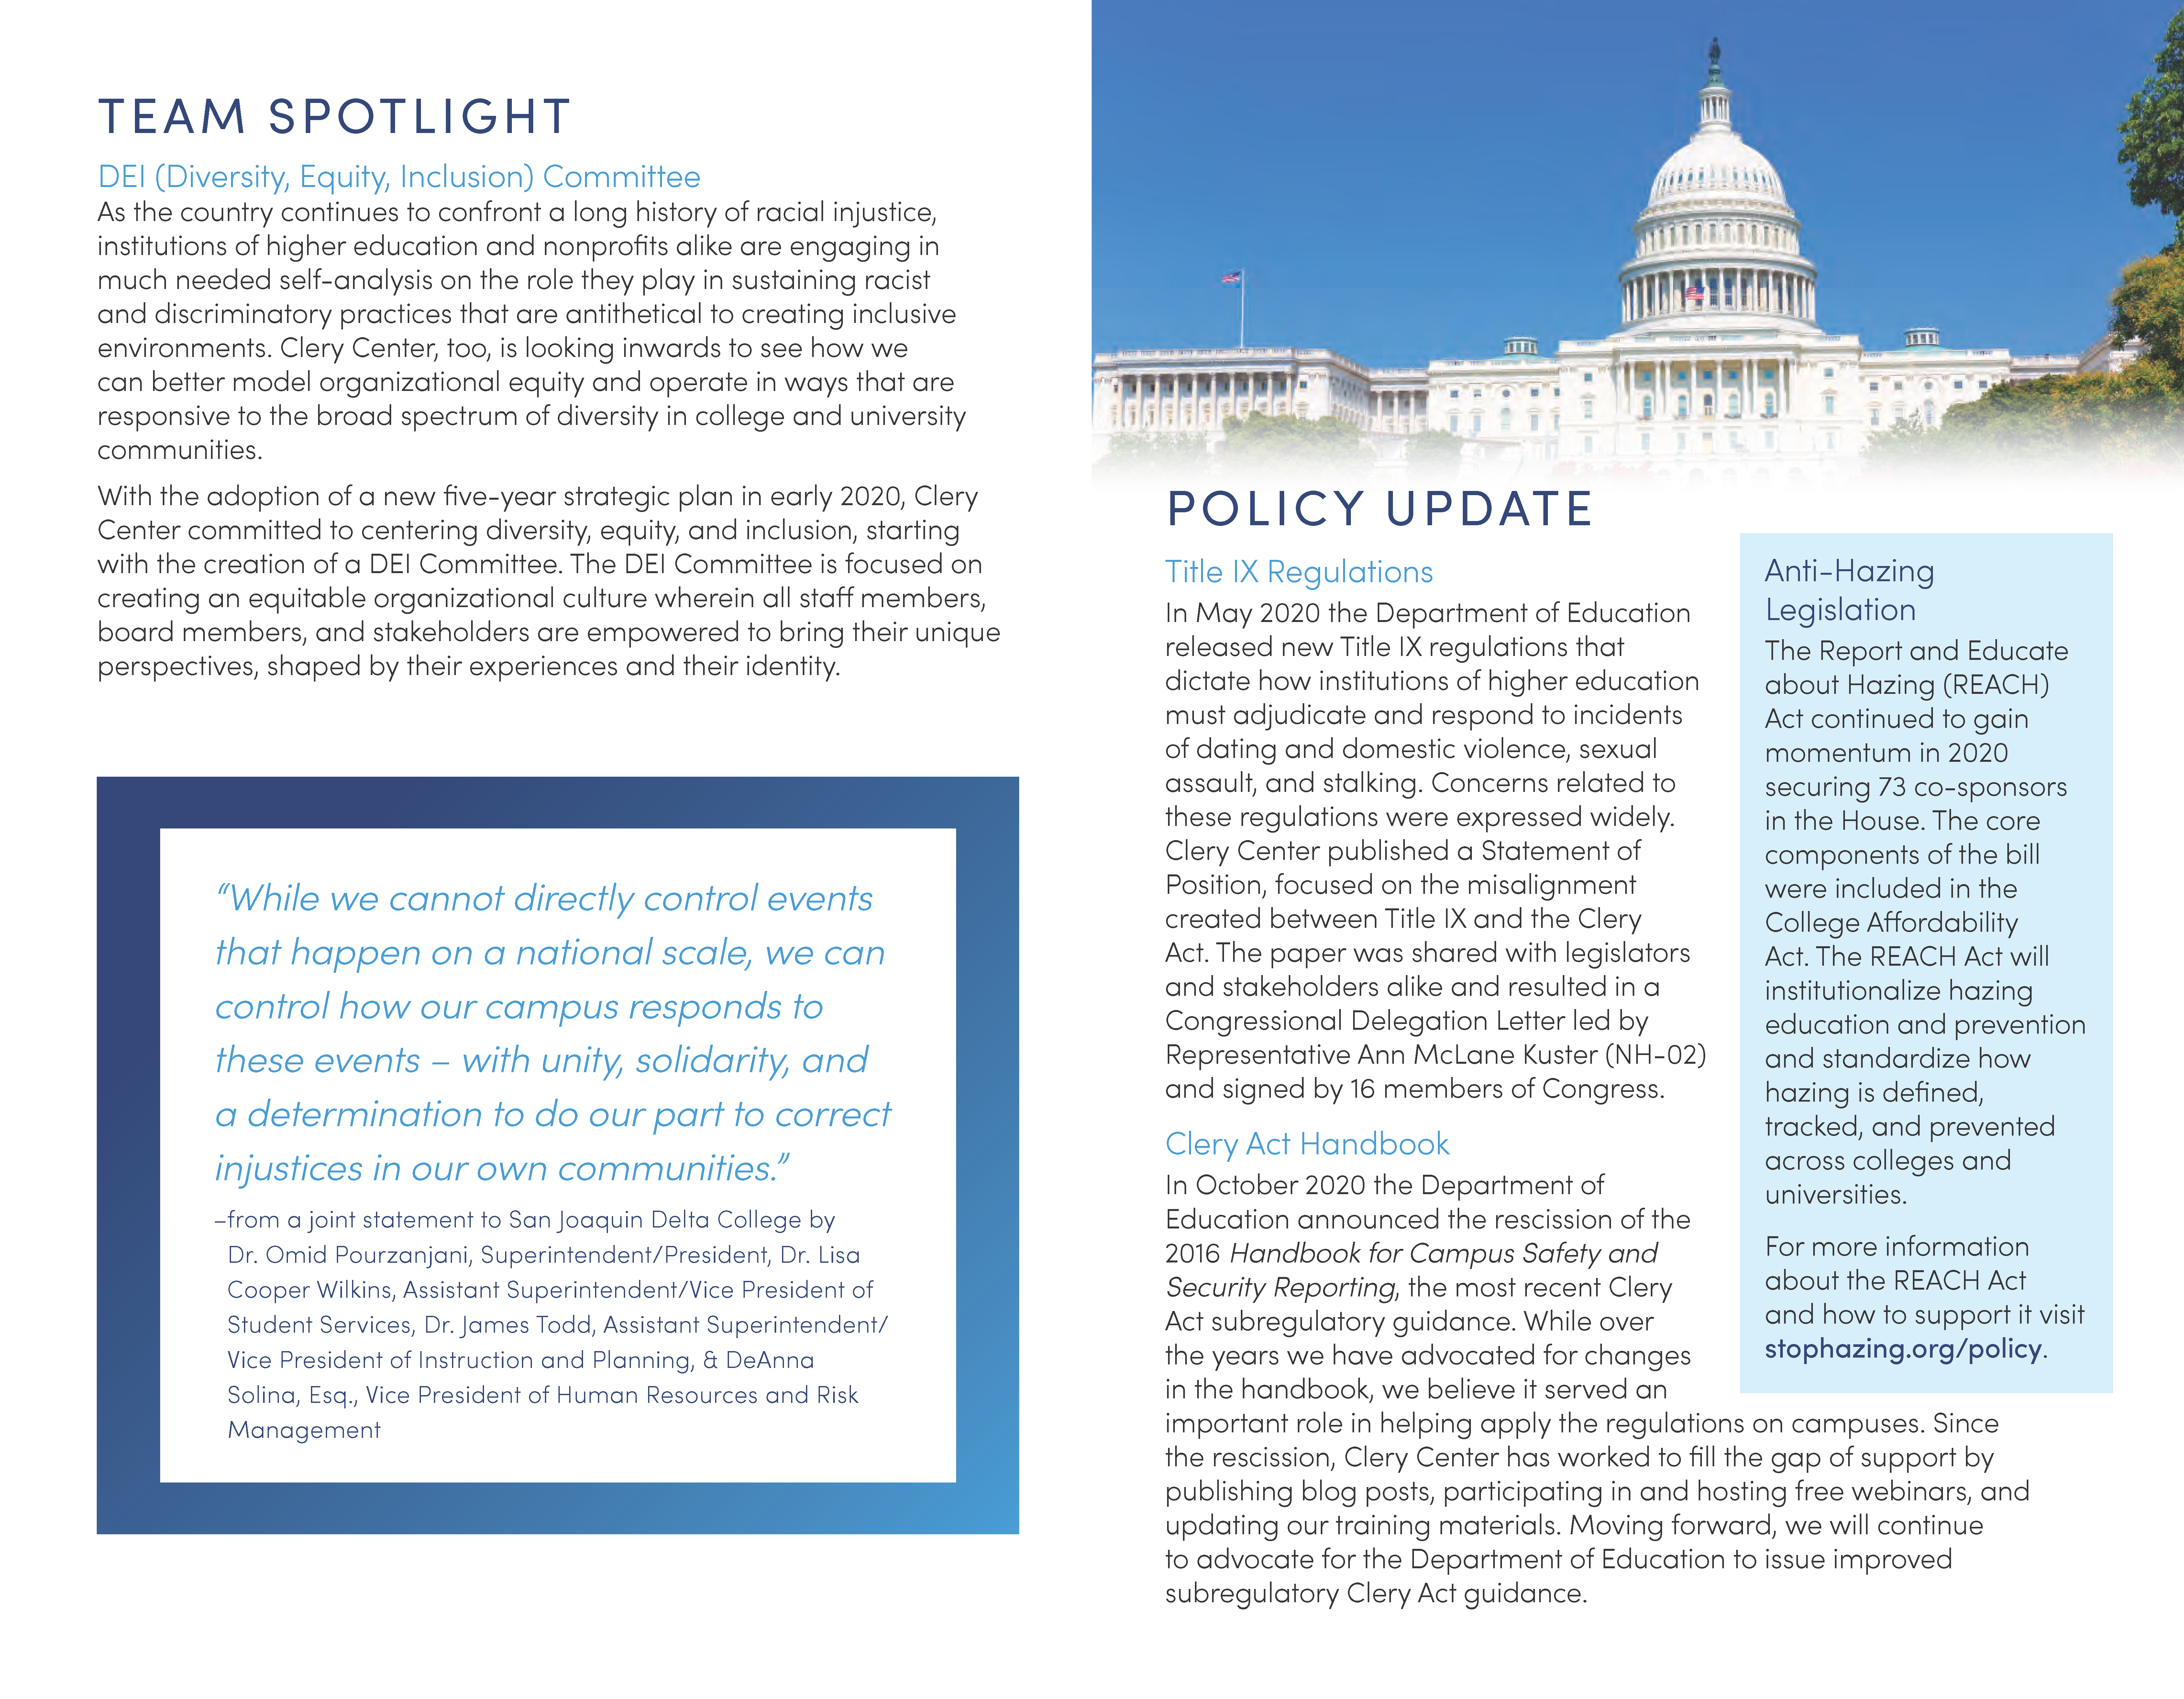 2020 Annual Report - page 5 image